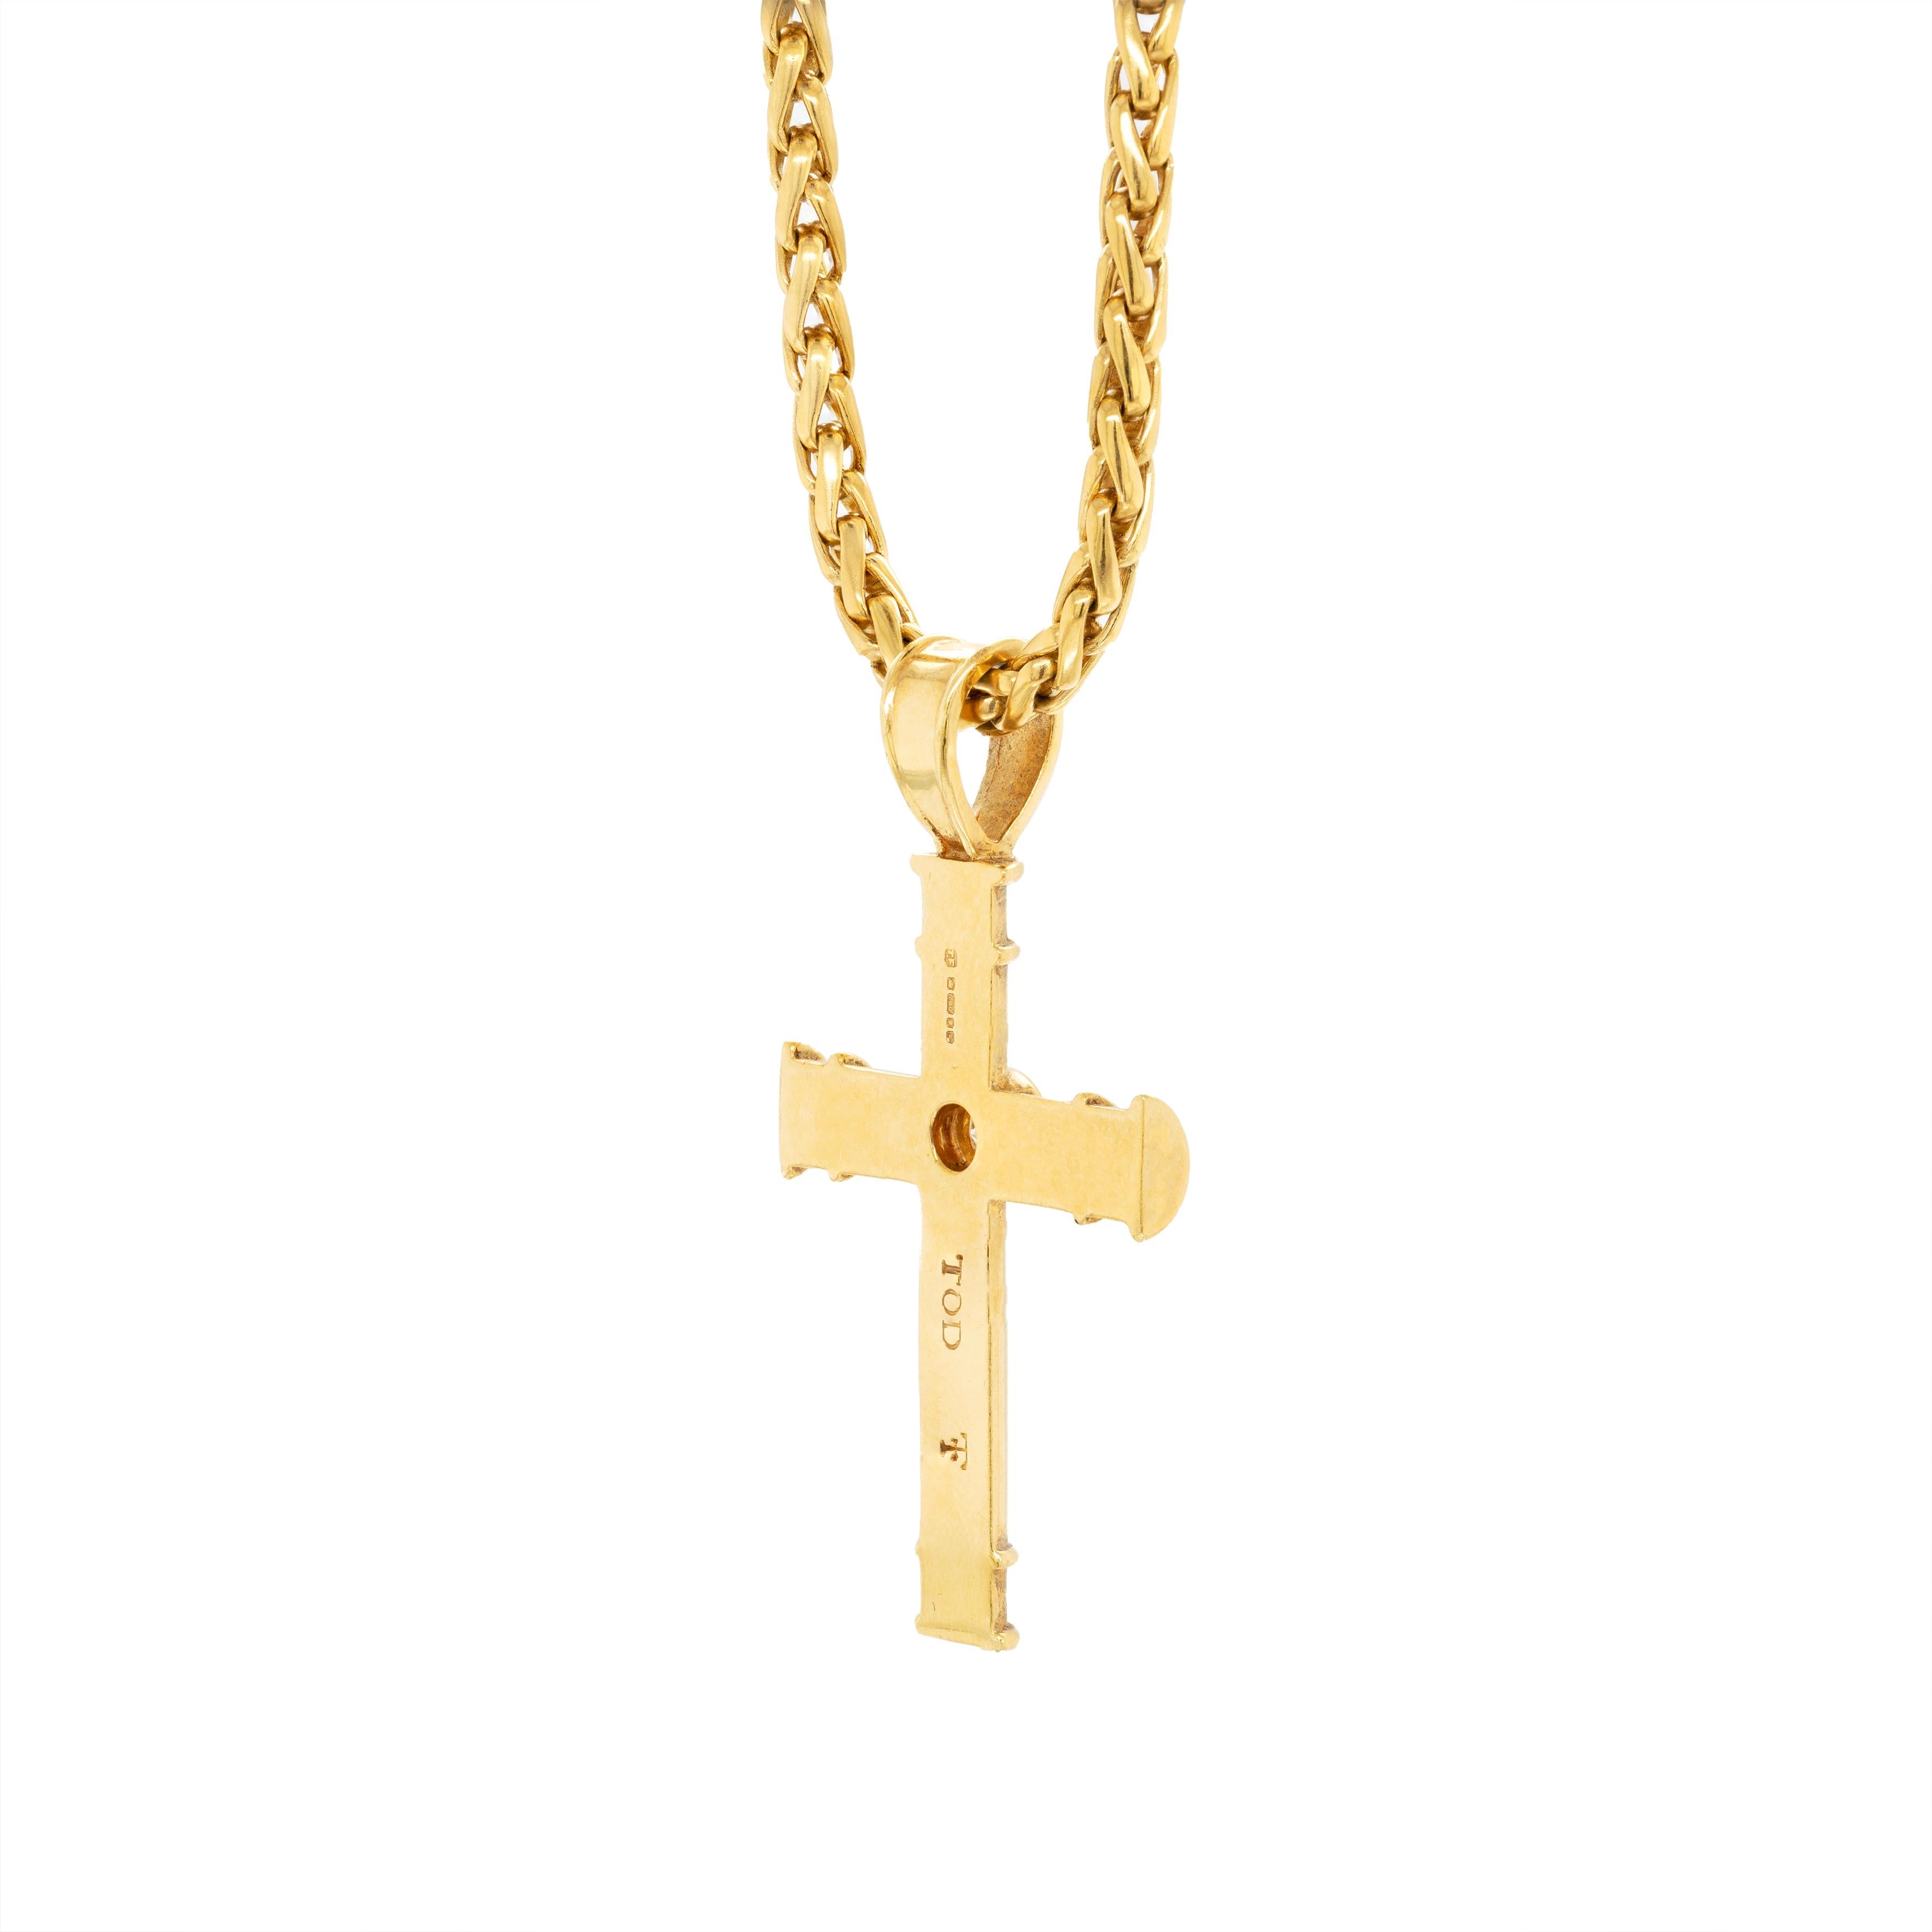 Theo Fennel solid 18 carat gold cross pendant set with a round brilliant cut fine quality diamond of approximately 0.30 carats in a rub-over open back setting. The pendant measures 45mm by 24mm and weighs 9.2 grams and comes with a Theo Fennel,